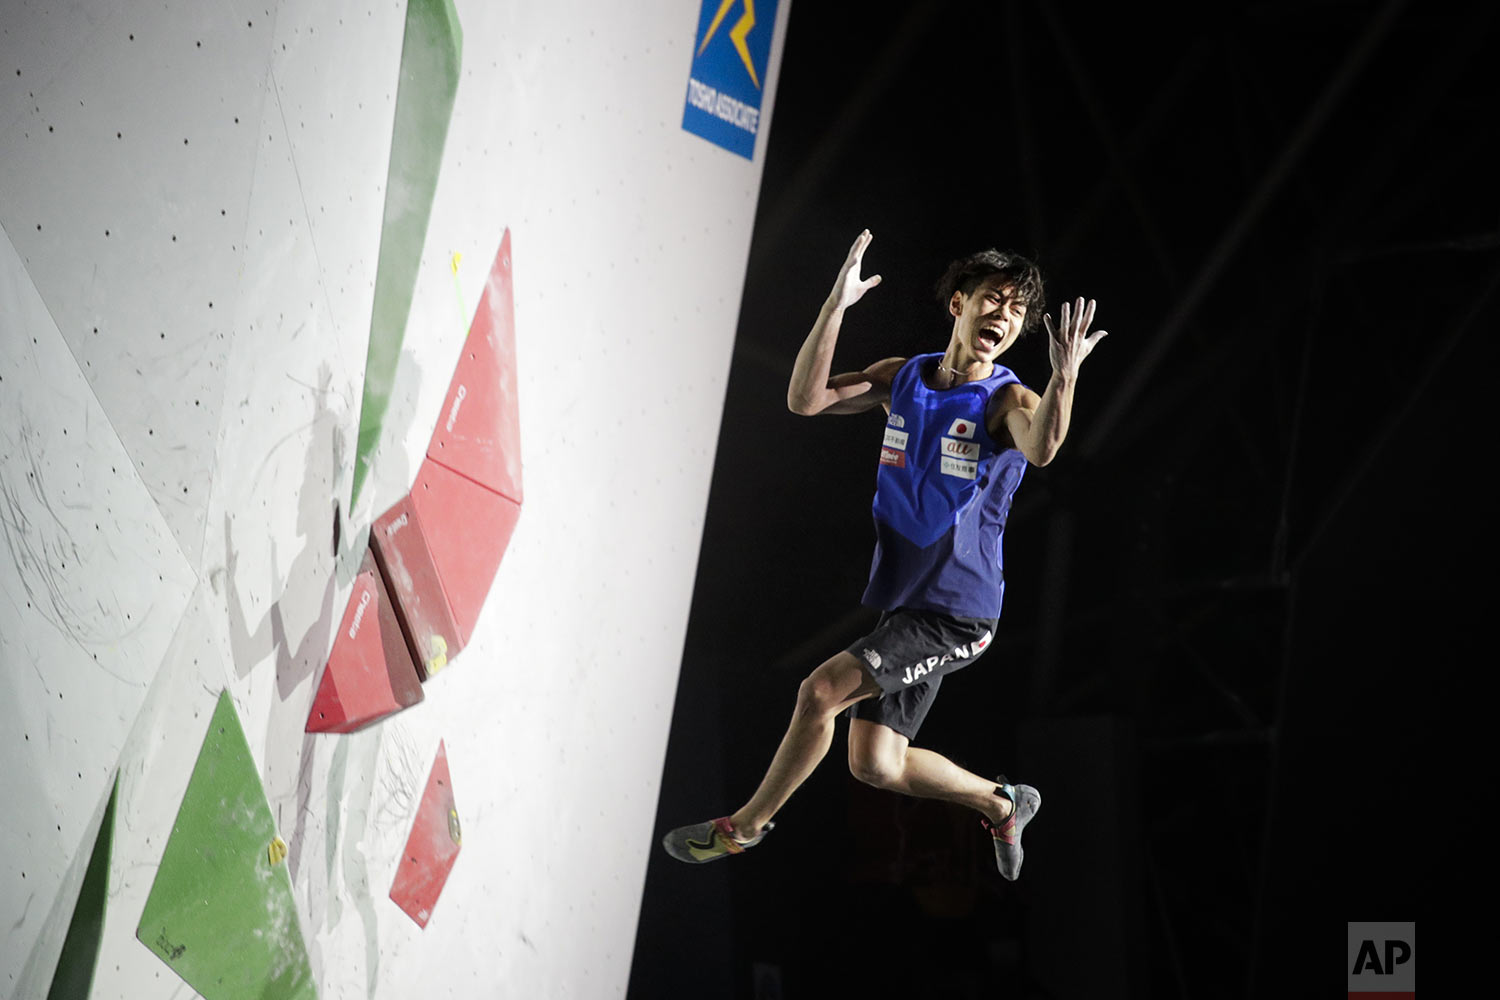  Kai Harada, of Japan, reacts as he falls from a bouldering wall during the men's combined bouldering final at the International Federation of Sport Climbing World Championships, in Tokyo, Wednesday, Aug. 21, 2019. (AP Photo/Jae C. Hong) 